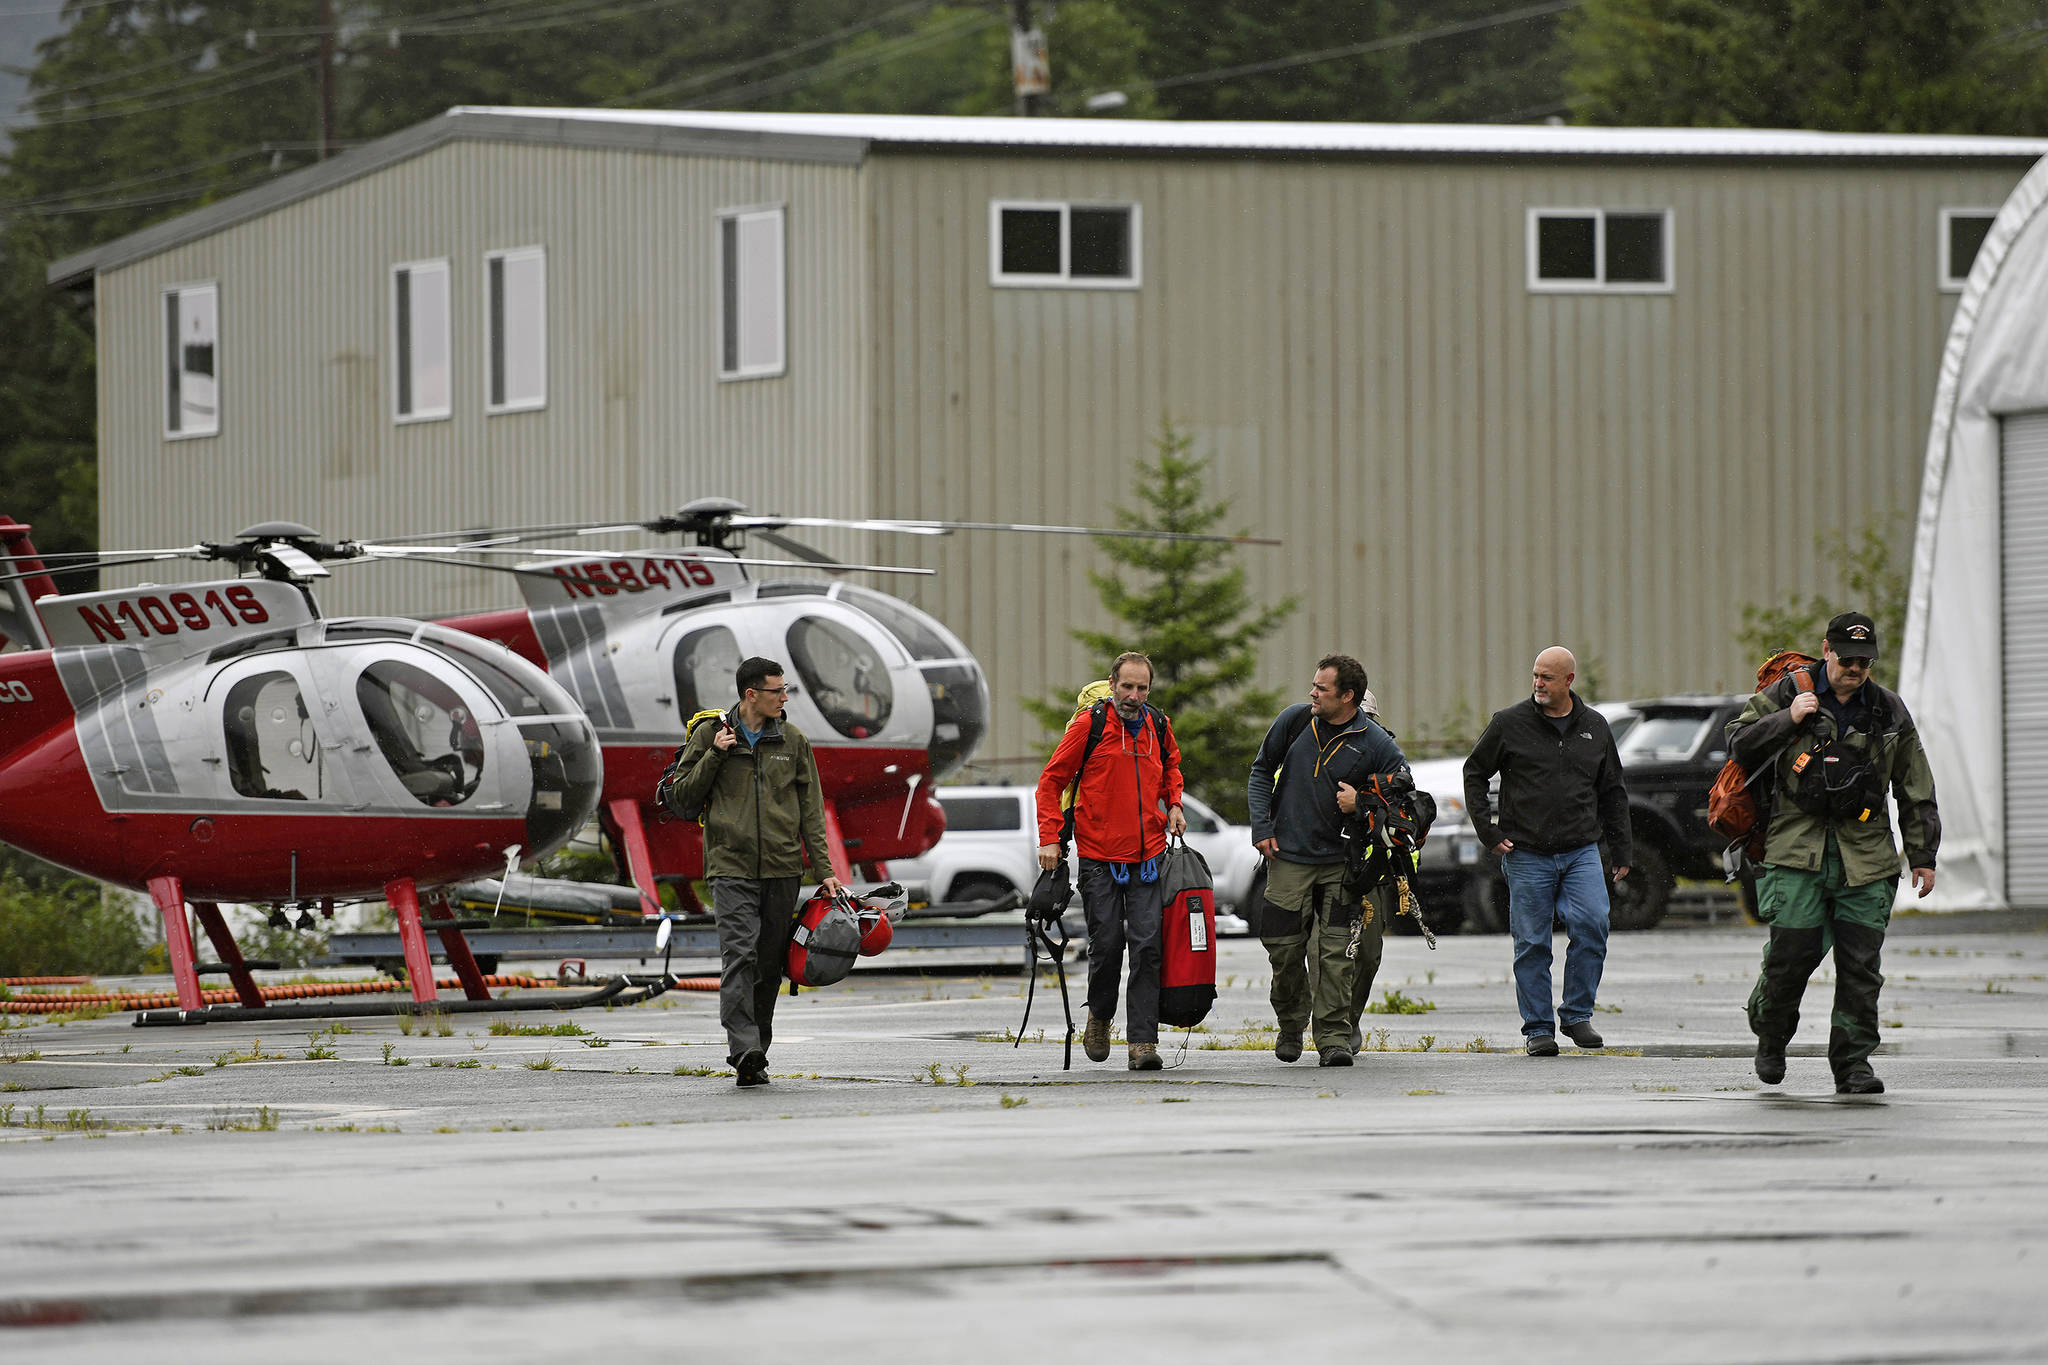 Ketchikan Volunteer Rescue Squad personnel land and disembark from a Hughes 369D helicopter on Thursday, Aug. 5, 2021, at Temsco Helicopters Inc in Ketchikan, Alaska. The KVRS, U.S. Coast Guard, Alaska State Troopers and U.S. Forest Service responded to a radio beacon alert from a downed Southeast Aviation de Havilland Beaver float plane that was carrying five passengers from the Holland America Line cruise ship Nieuw Amsterdam, according to Coast Guard, Holland America and KVRS information. The sightseeing plane crashed Thursday in southeast Alaska, killing all six people on board, the U.S. Coast Guard said. (Dustin Safranek / Ketchikan Daily News)
Ketchikan Volunteer Rescue Squad personnel land and disembark from a Hughes 369D helicopter on Thursday, Aug. 5, 2021, at Temsco Helicopters Inc in Ketchikan, Alaska. The KVRS, U.S. Coast Guard, Alaska State Troopers and U.S. Forest Service responded to a radio beacon alert from a downed Southeast Aviation de Havilland Beaver float plane that was carrying five passengers from the Holland America Line cruise ship Nieuw Amsterdam, according to Coast Guard, Holland America and KVRS information. The sightseeing plane crashed Thursday in southeast Alaska, killing all six people on board, the U.S. Coast Guard said. (Dustin Safranek / Ketchikan Daily News)